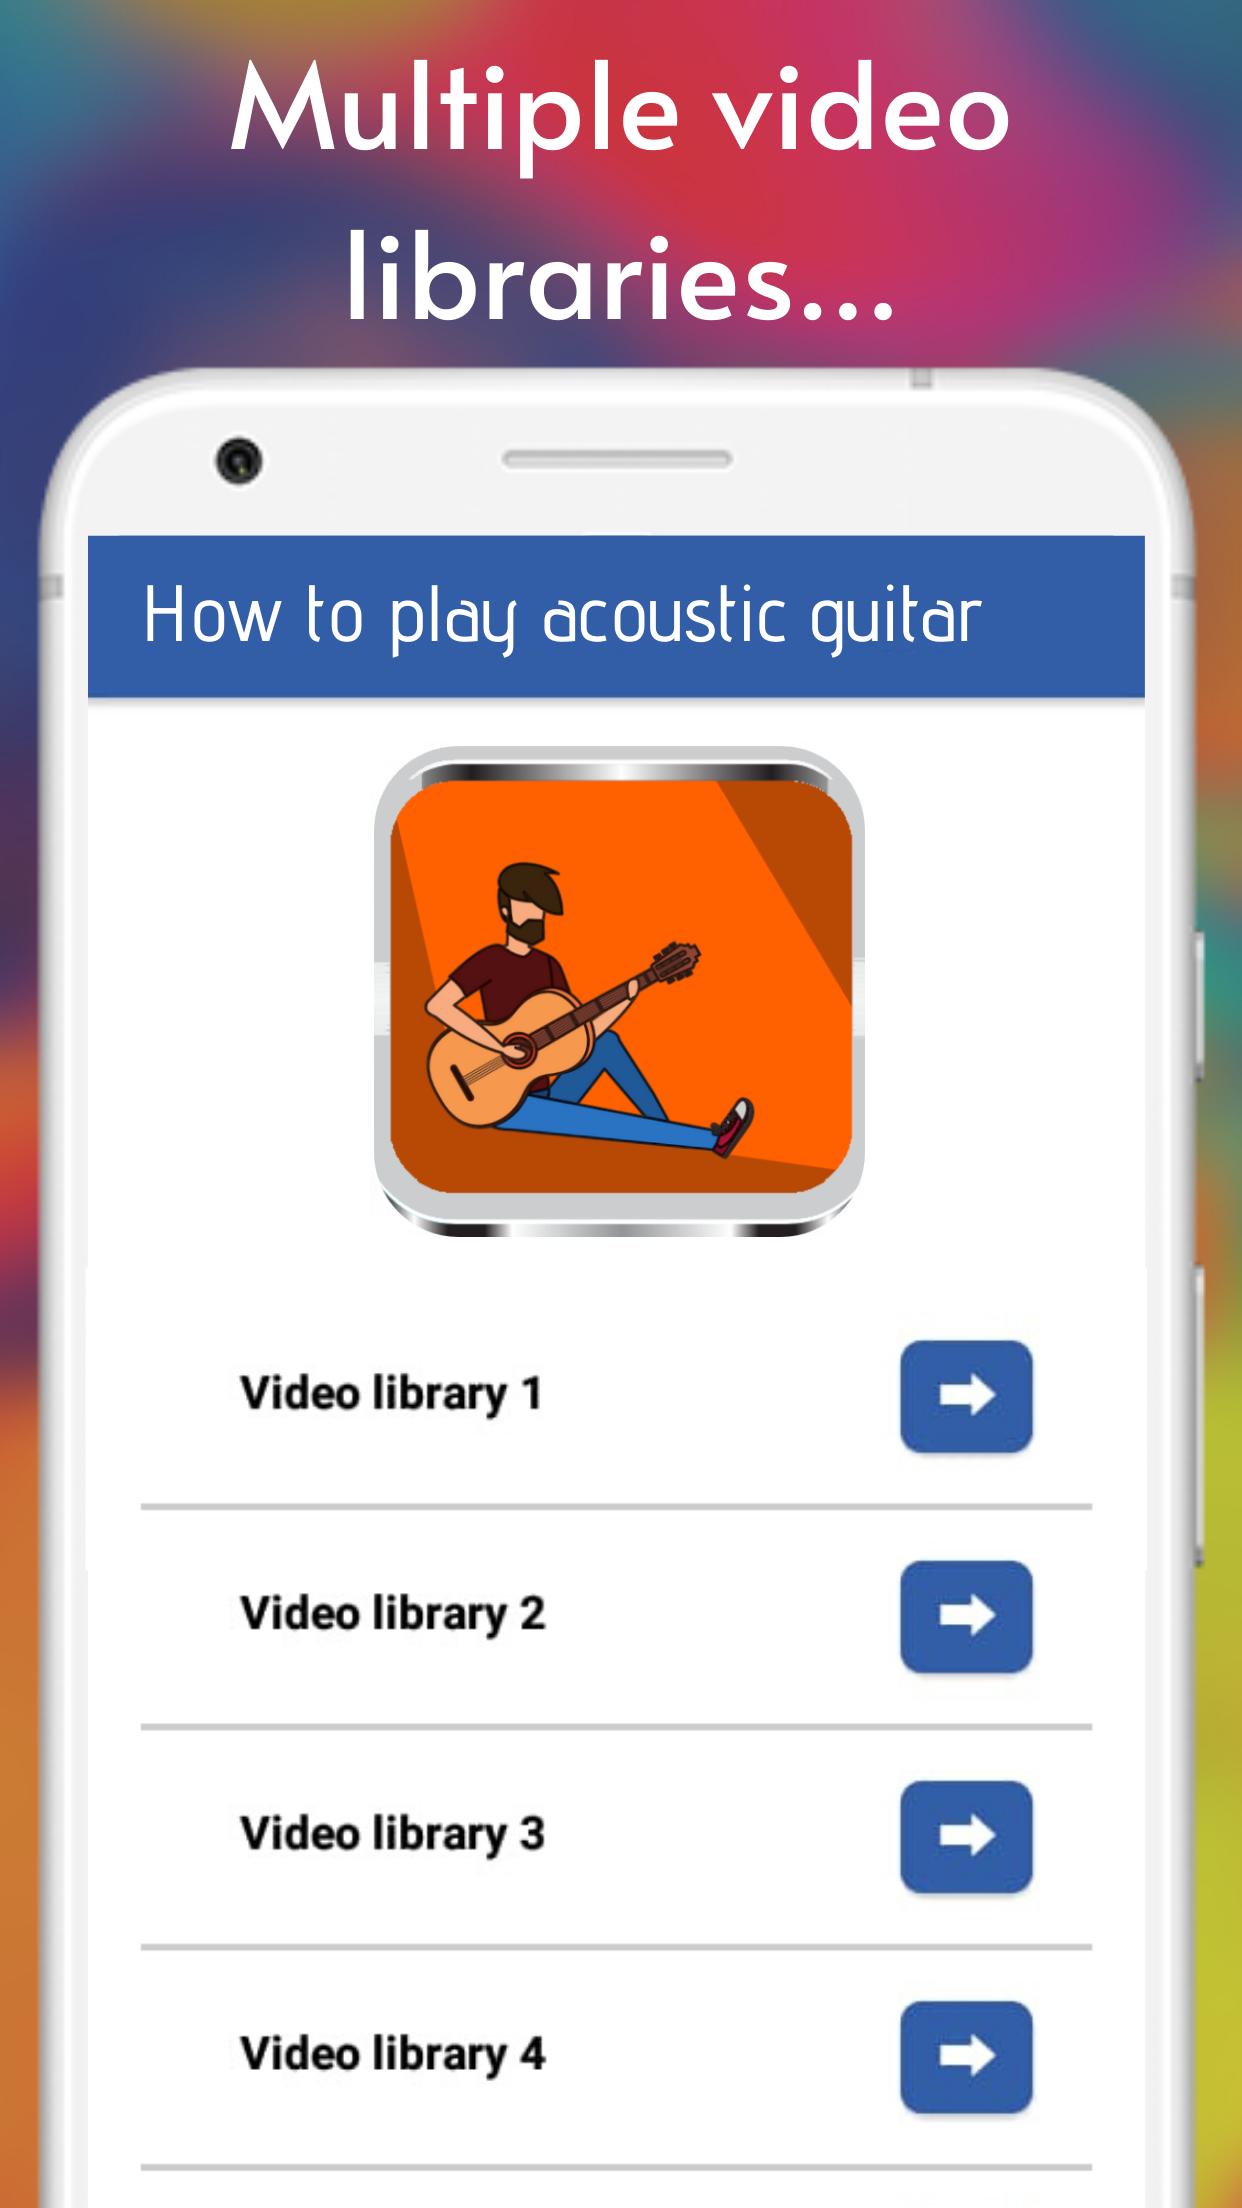 How to play acoustic guitar 5.0 Screenshot 1